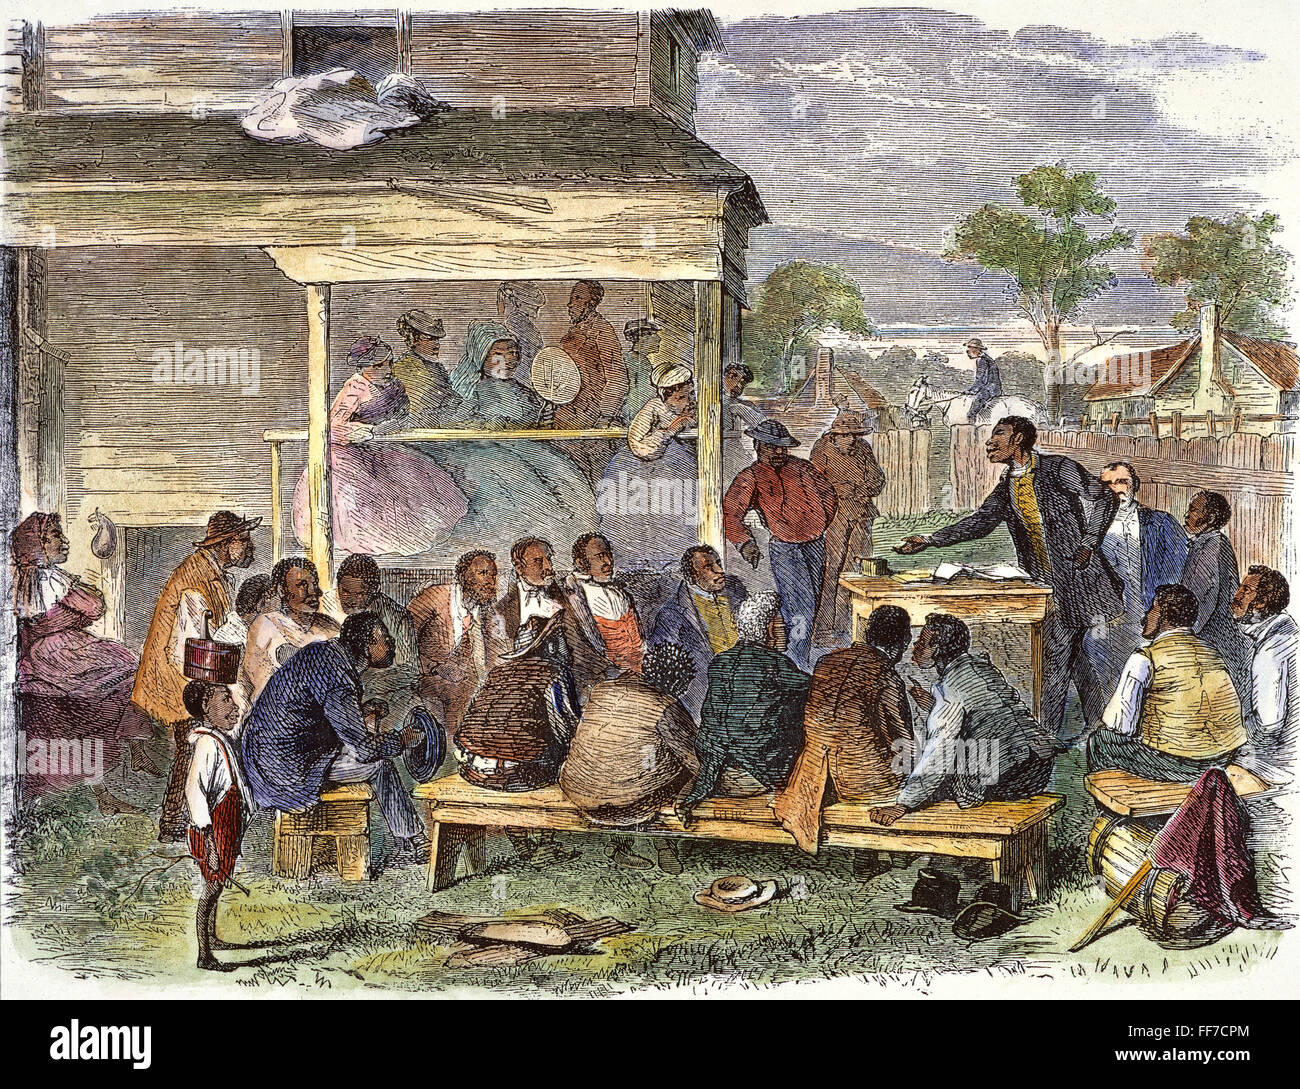 ELECTIONEERING, 1868. /nElectioneering among freedmen in the American South in 1868. Contemporary colored engraving. Stock Photo